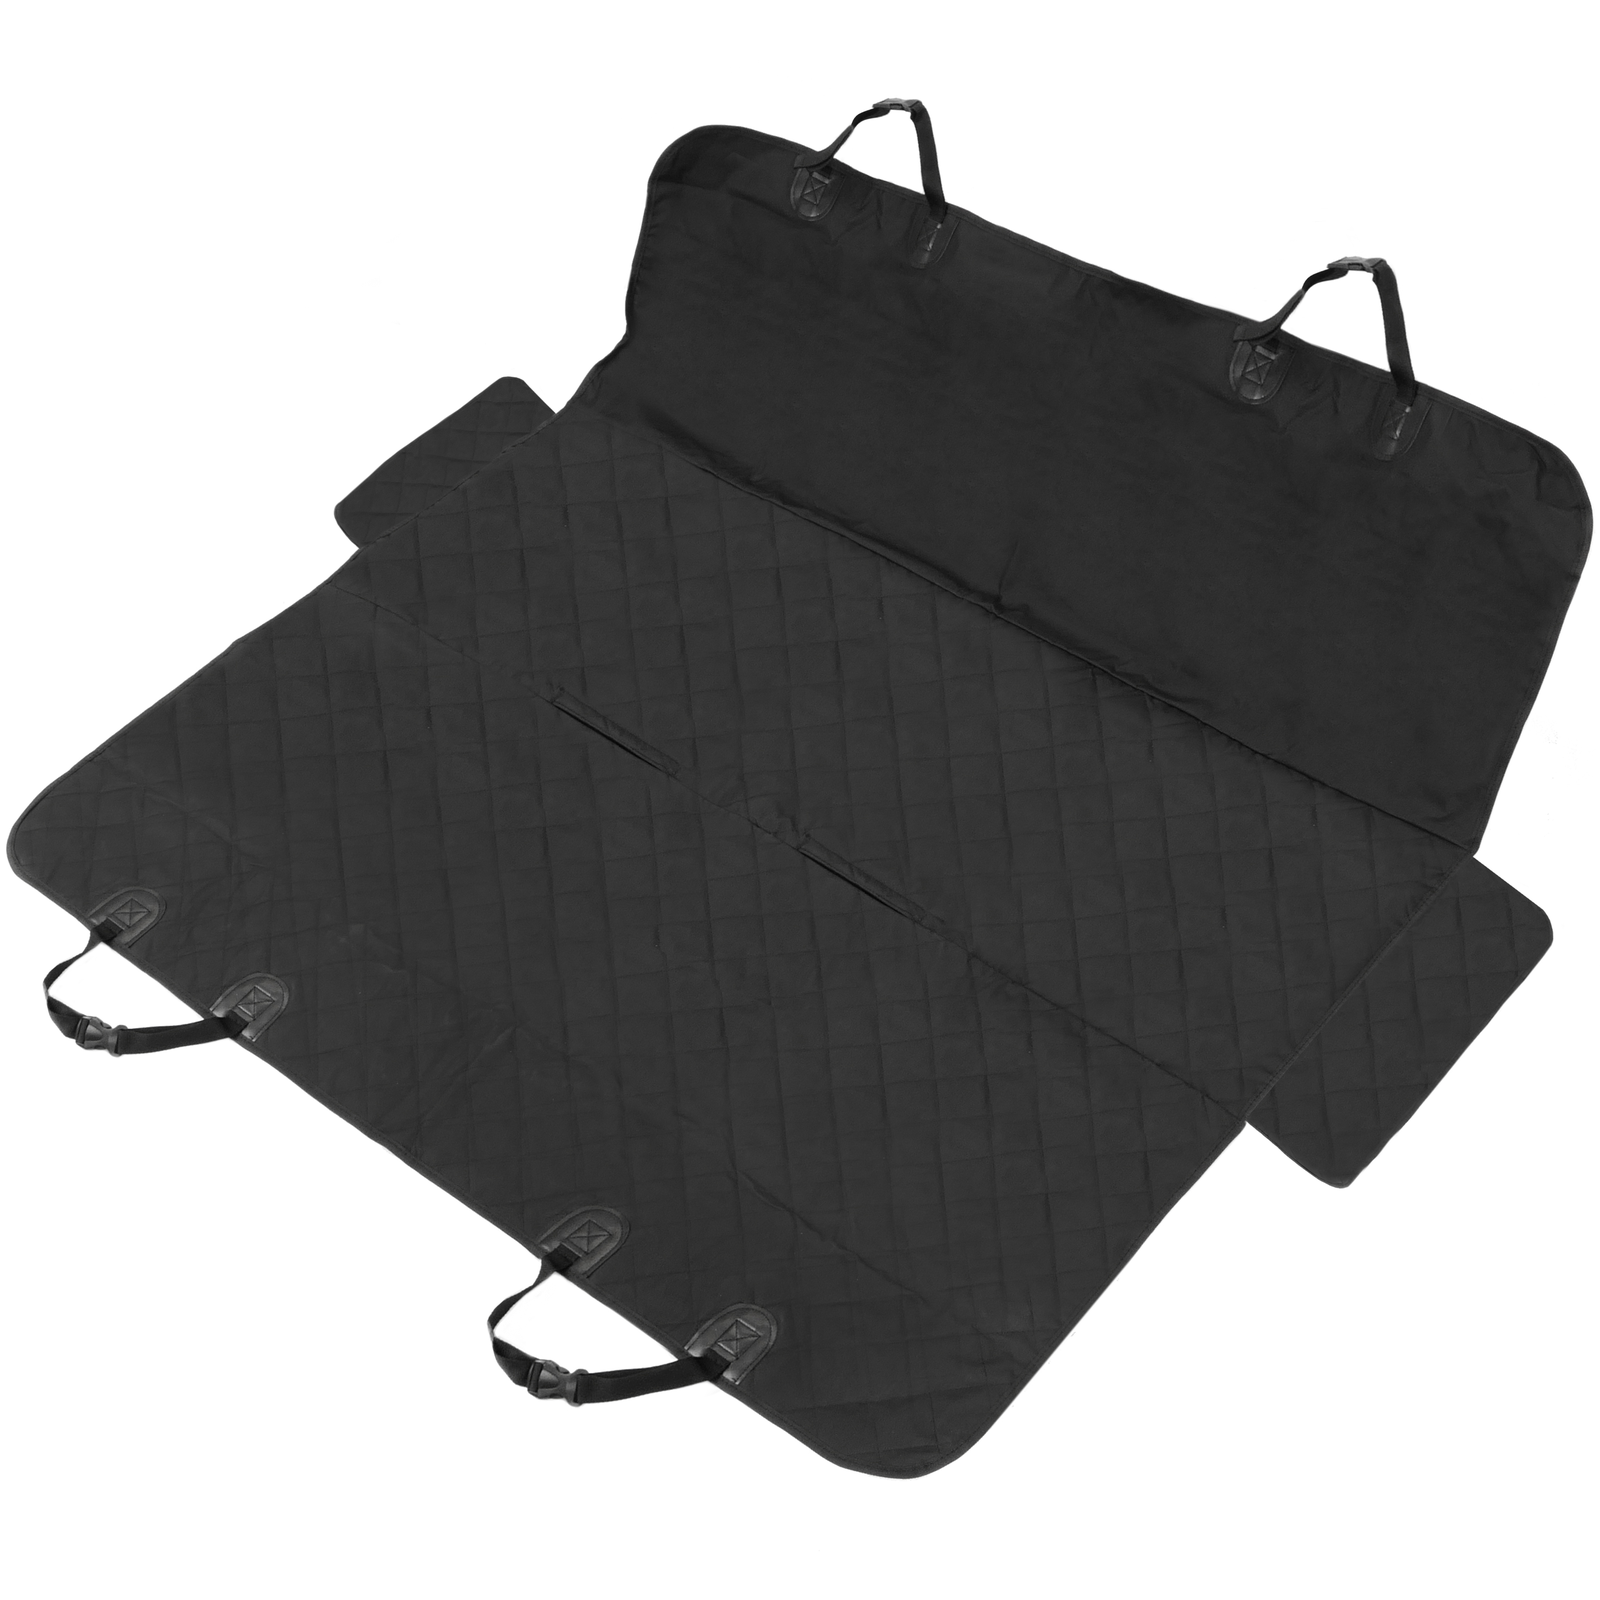 Padded car seat cover. Nonslip protective mat cover for dog hair